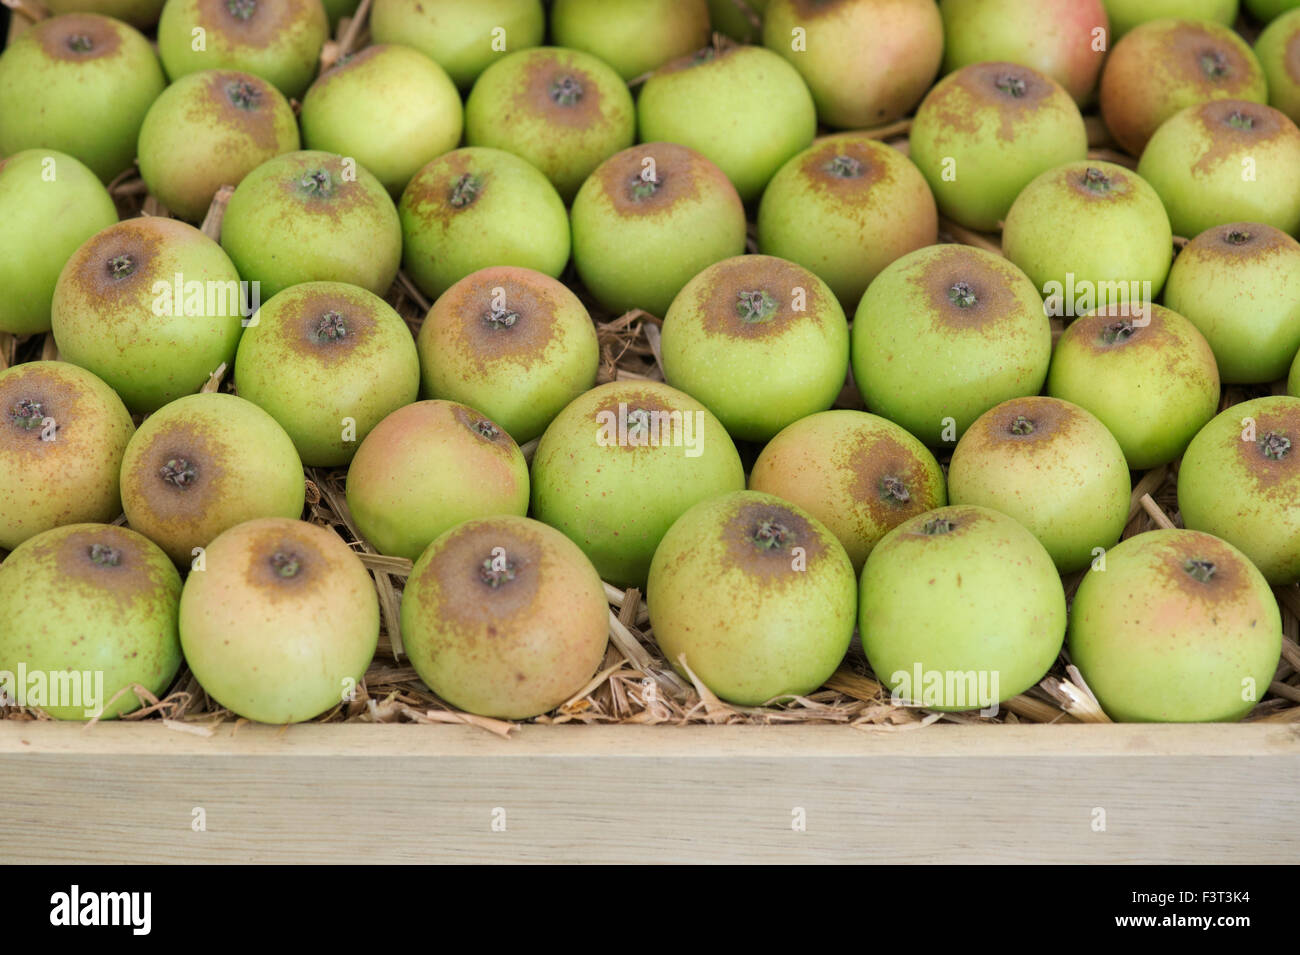 Malus domestica. Brown Snout cider apples Stock Photo